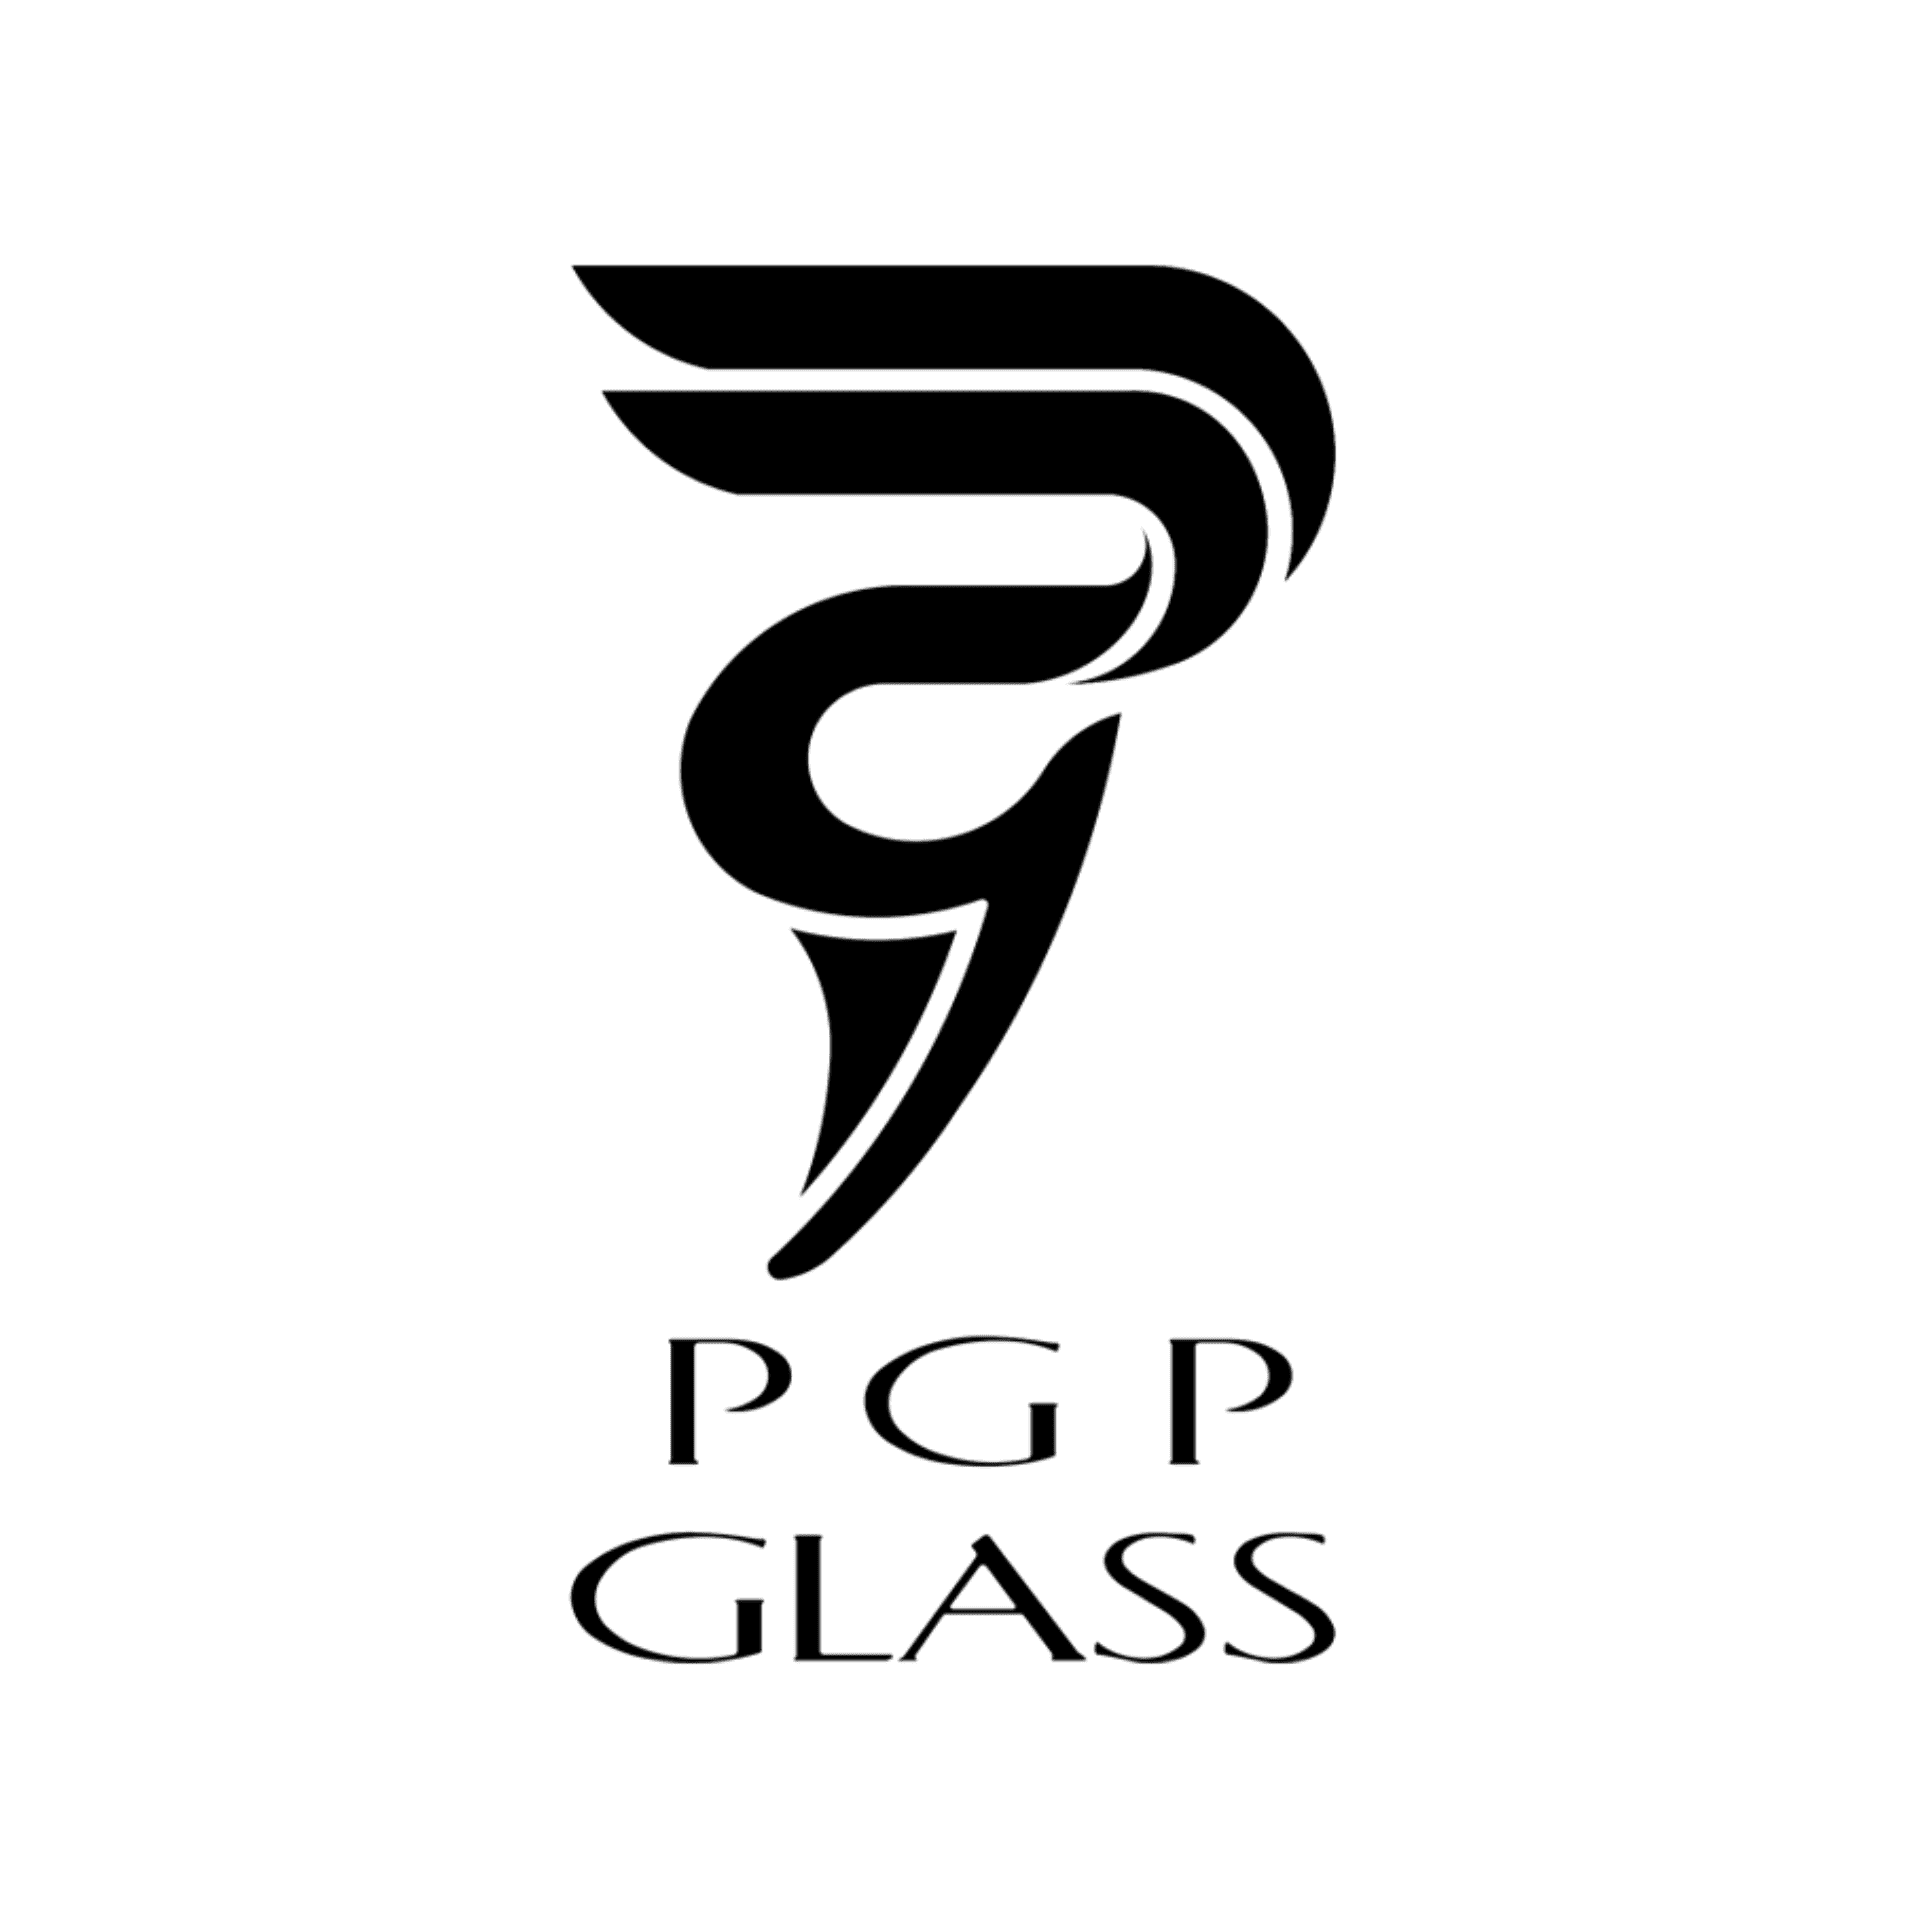 PGP Glass